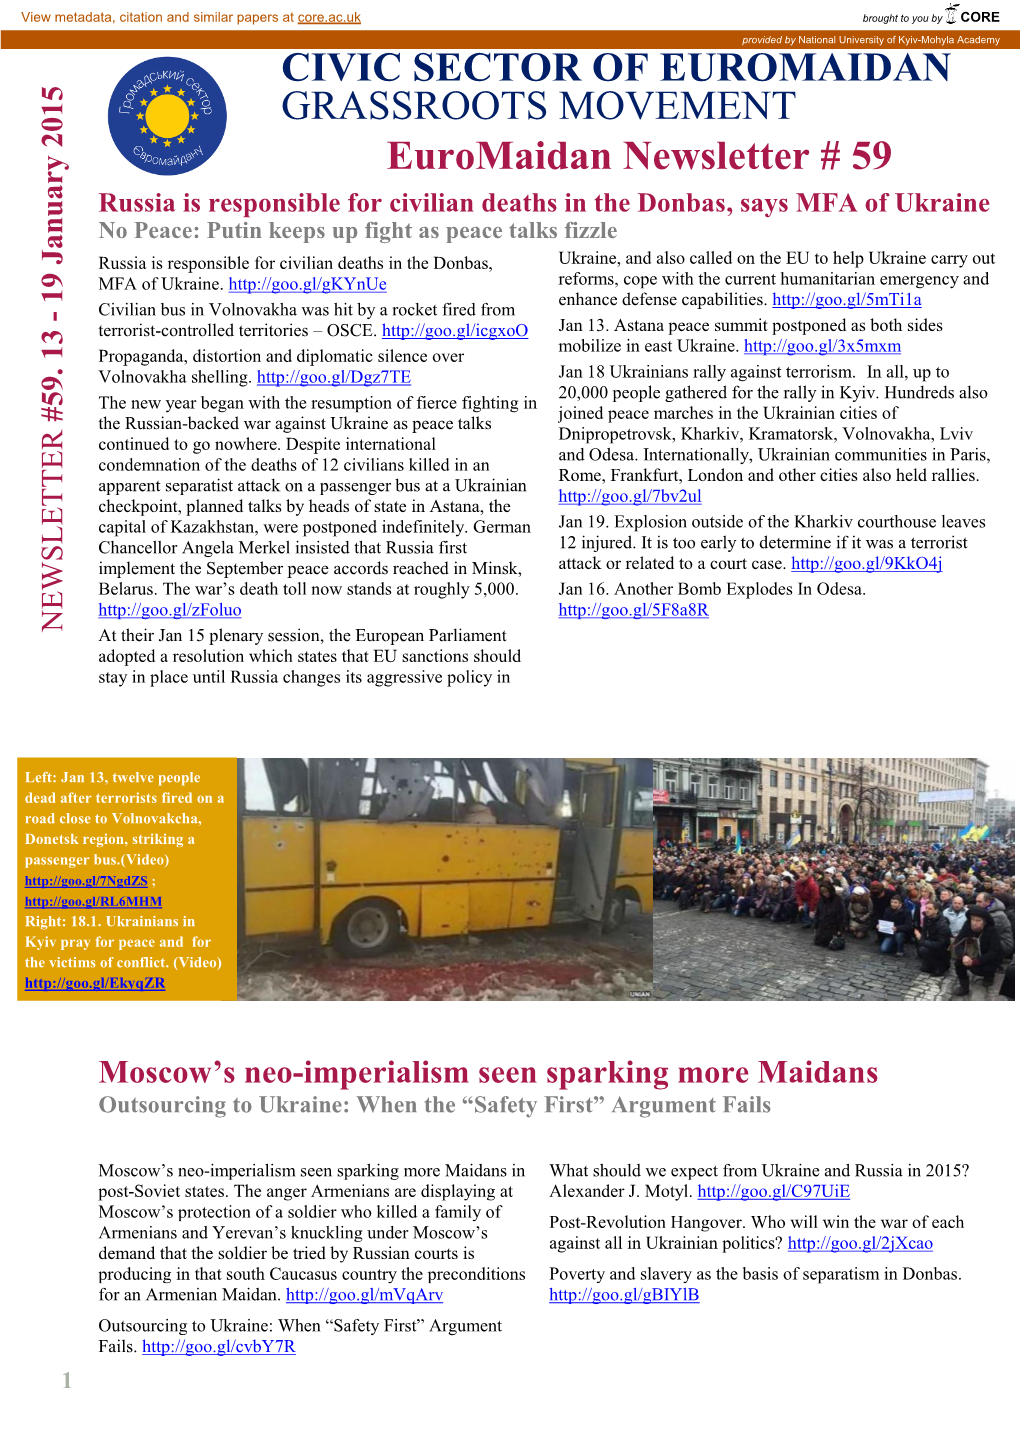 Euromaidan Newsletter # 59 CIVIC SECTOR OF